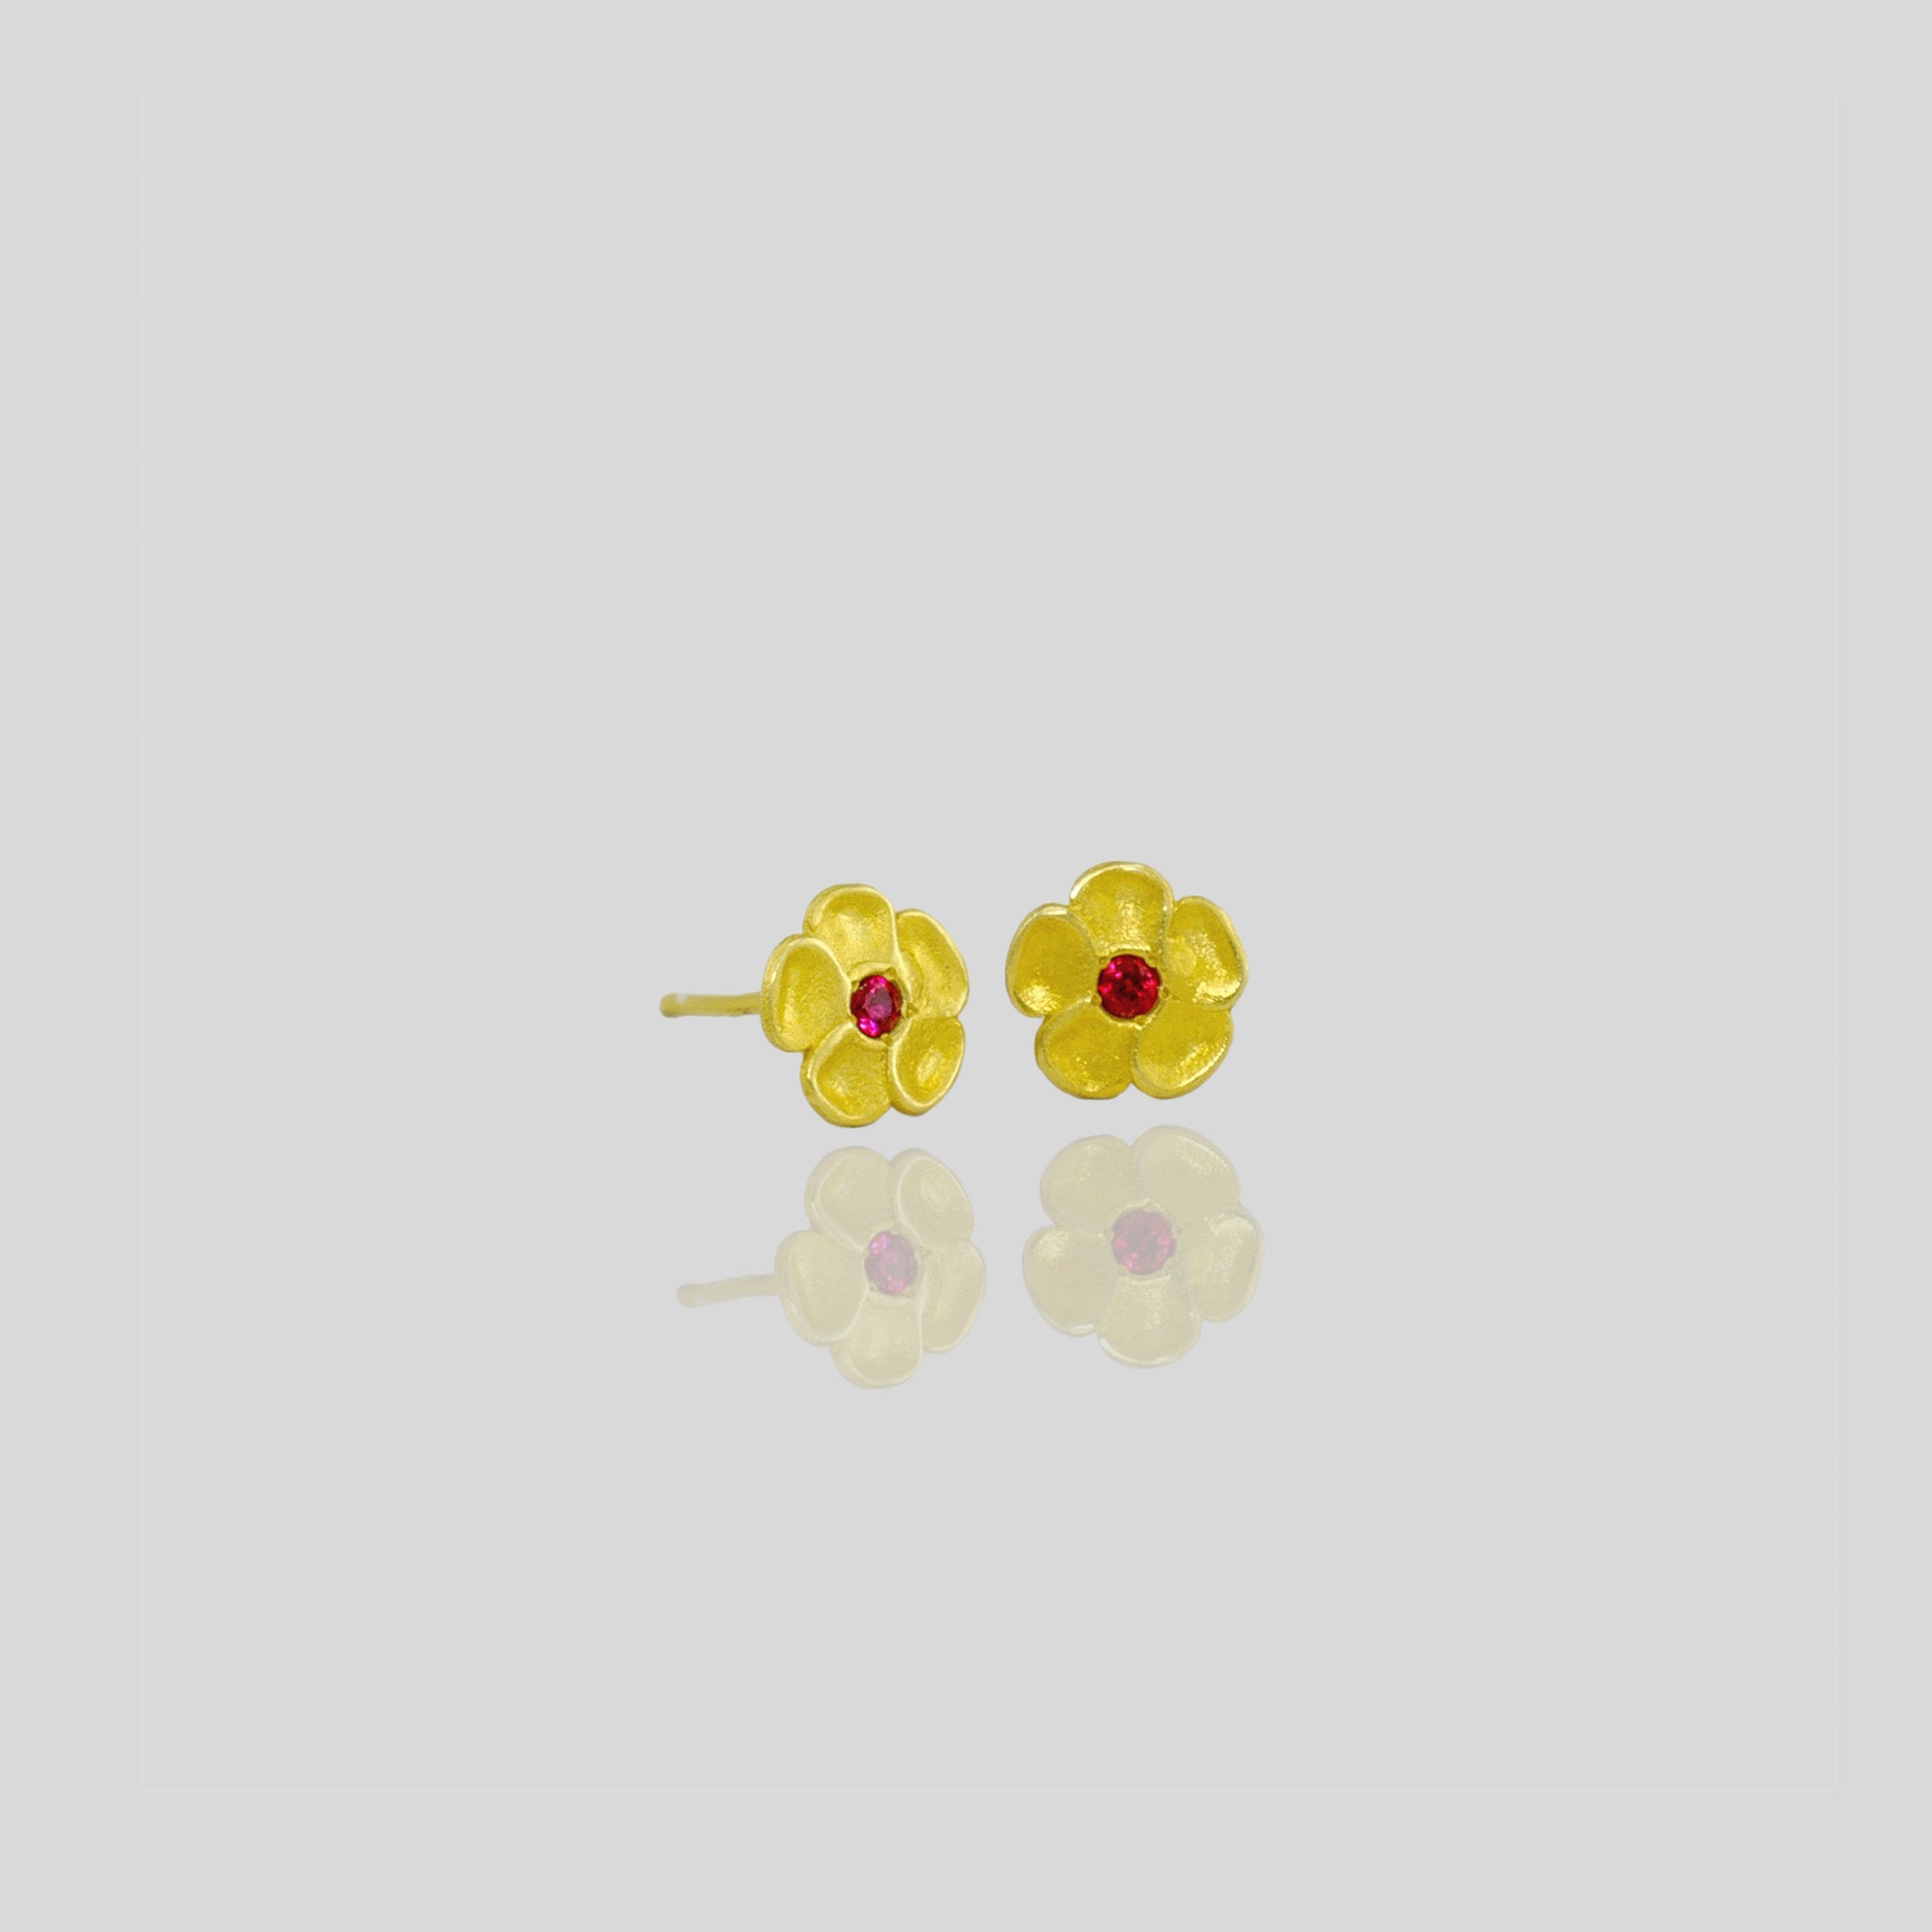 Delicate yellow gold flower stud earrings with a sparkling ruby center. Perfect for any occasion!